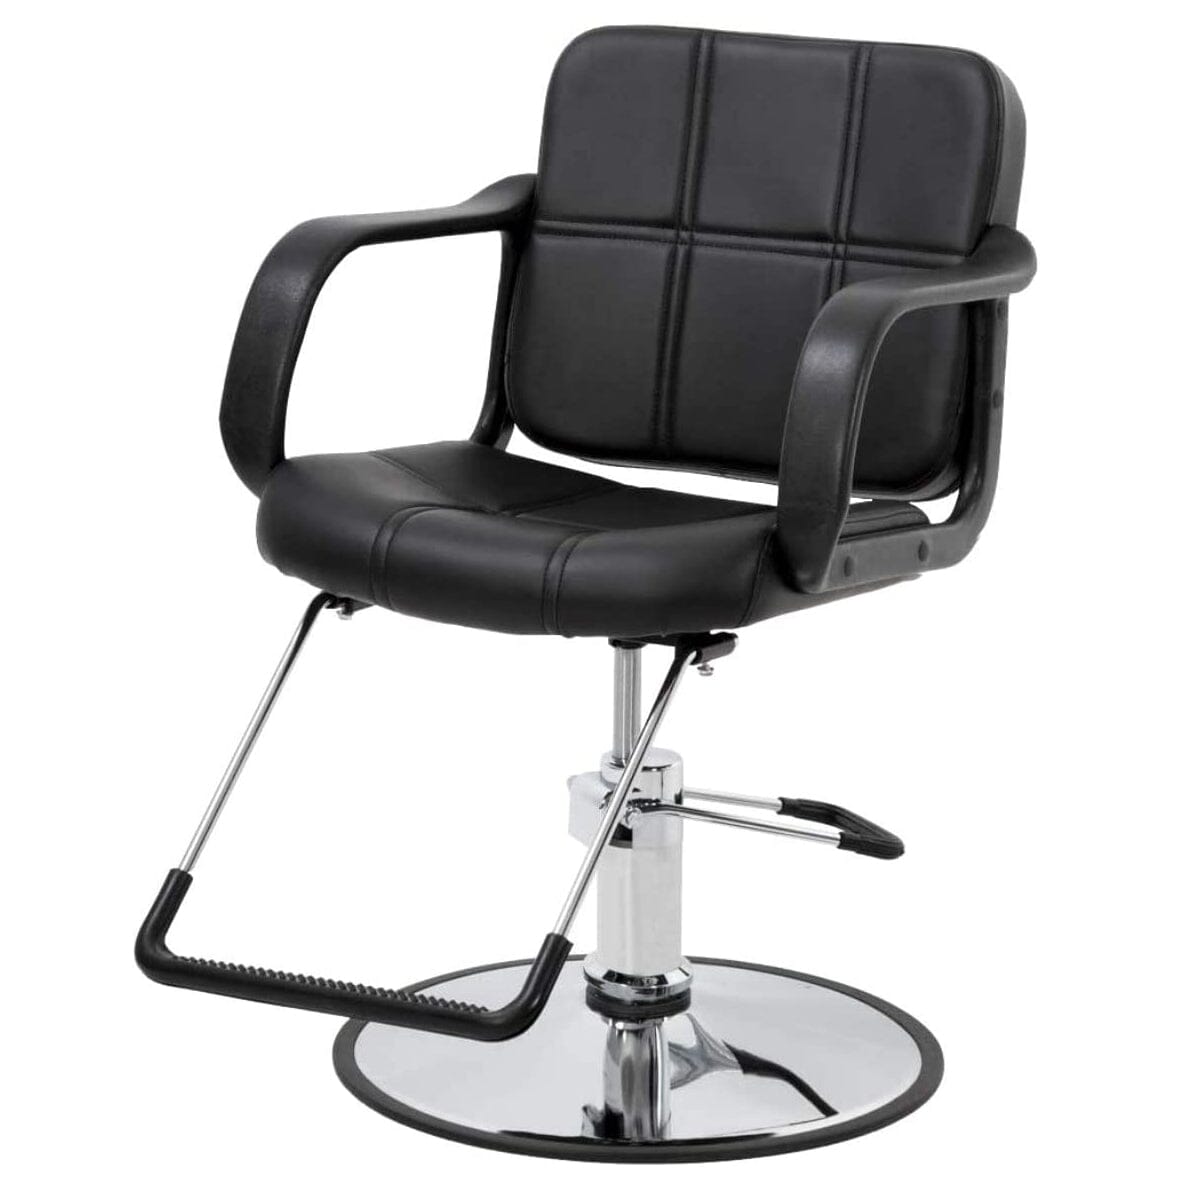 DK-68121 | Styling Chair Salon Chairs SSW 